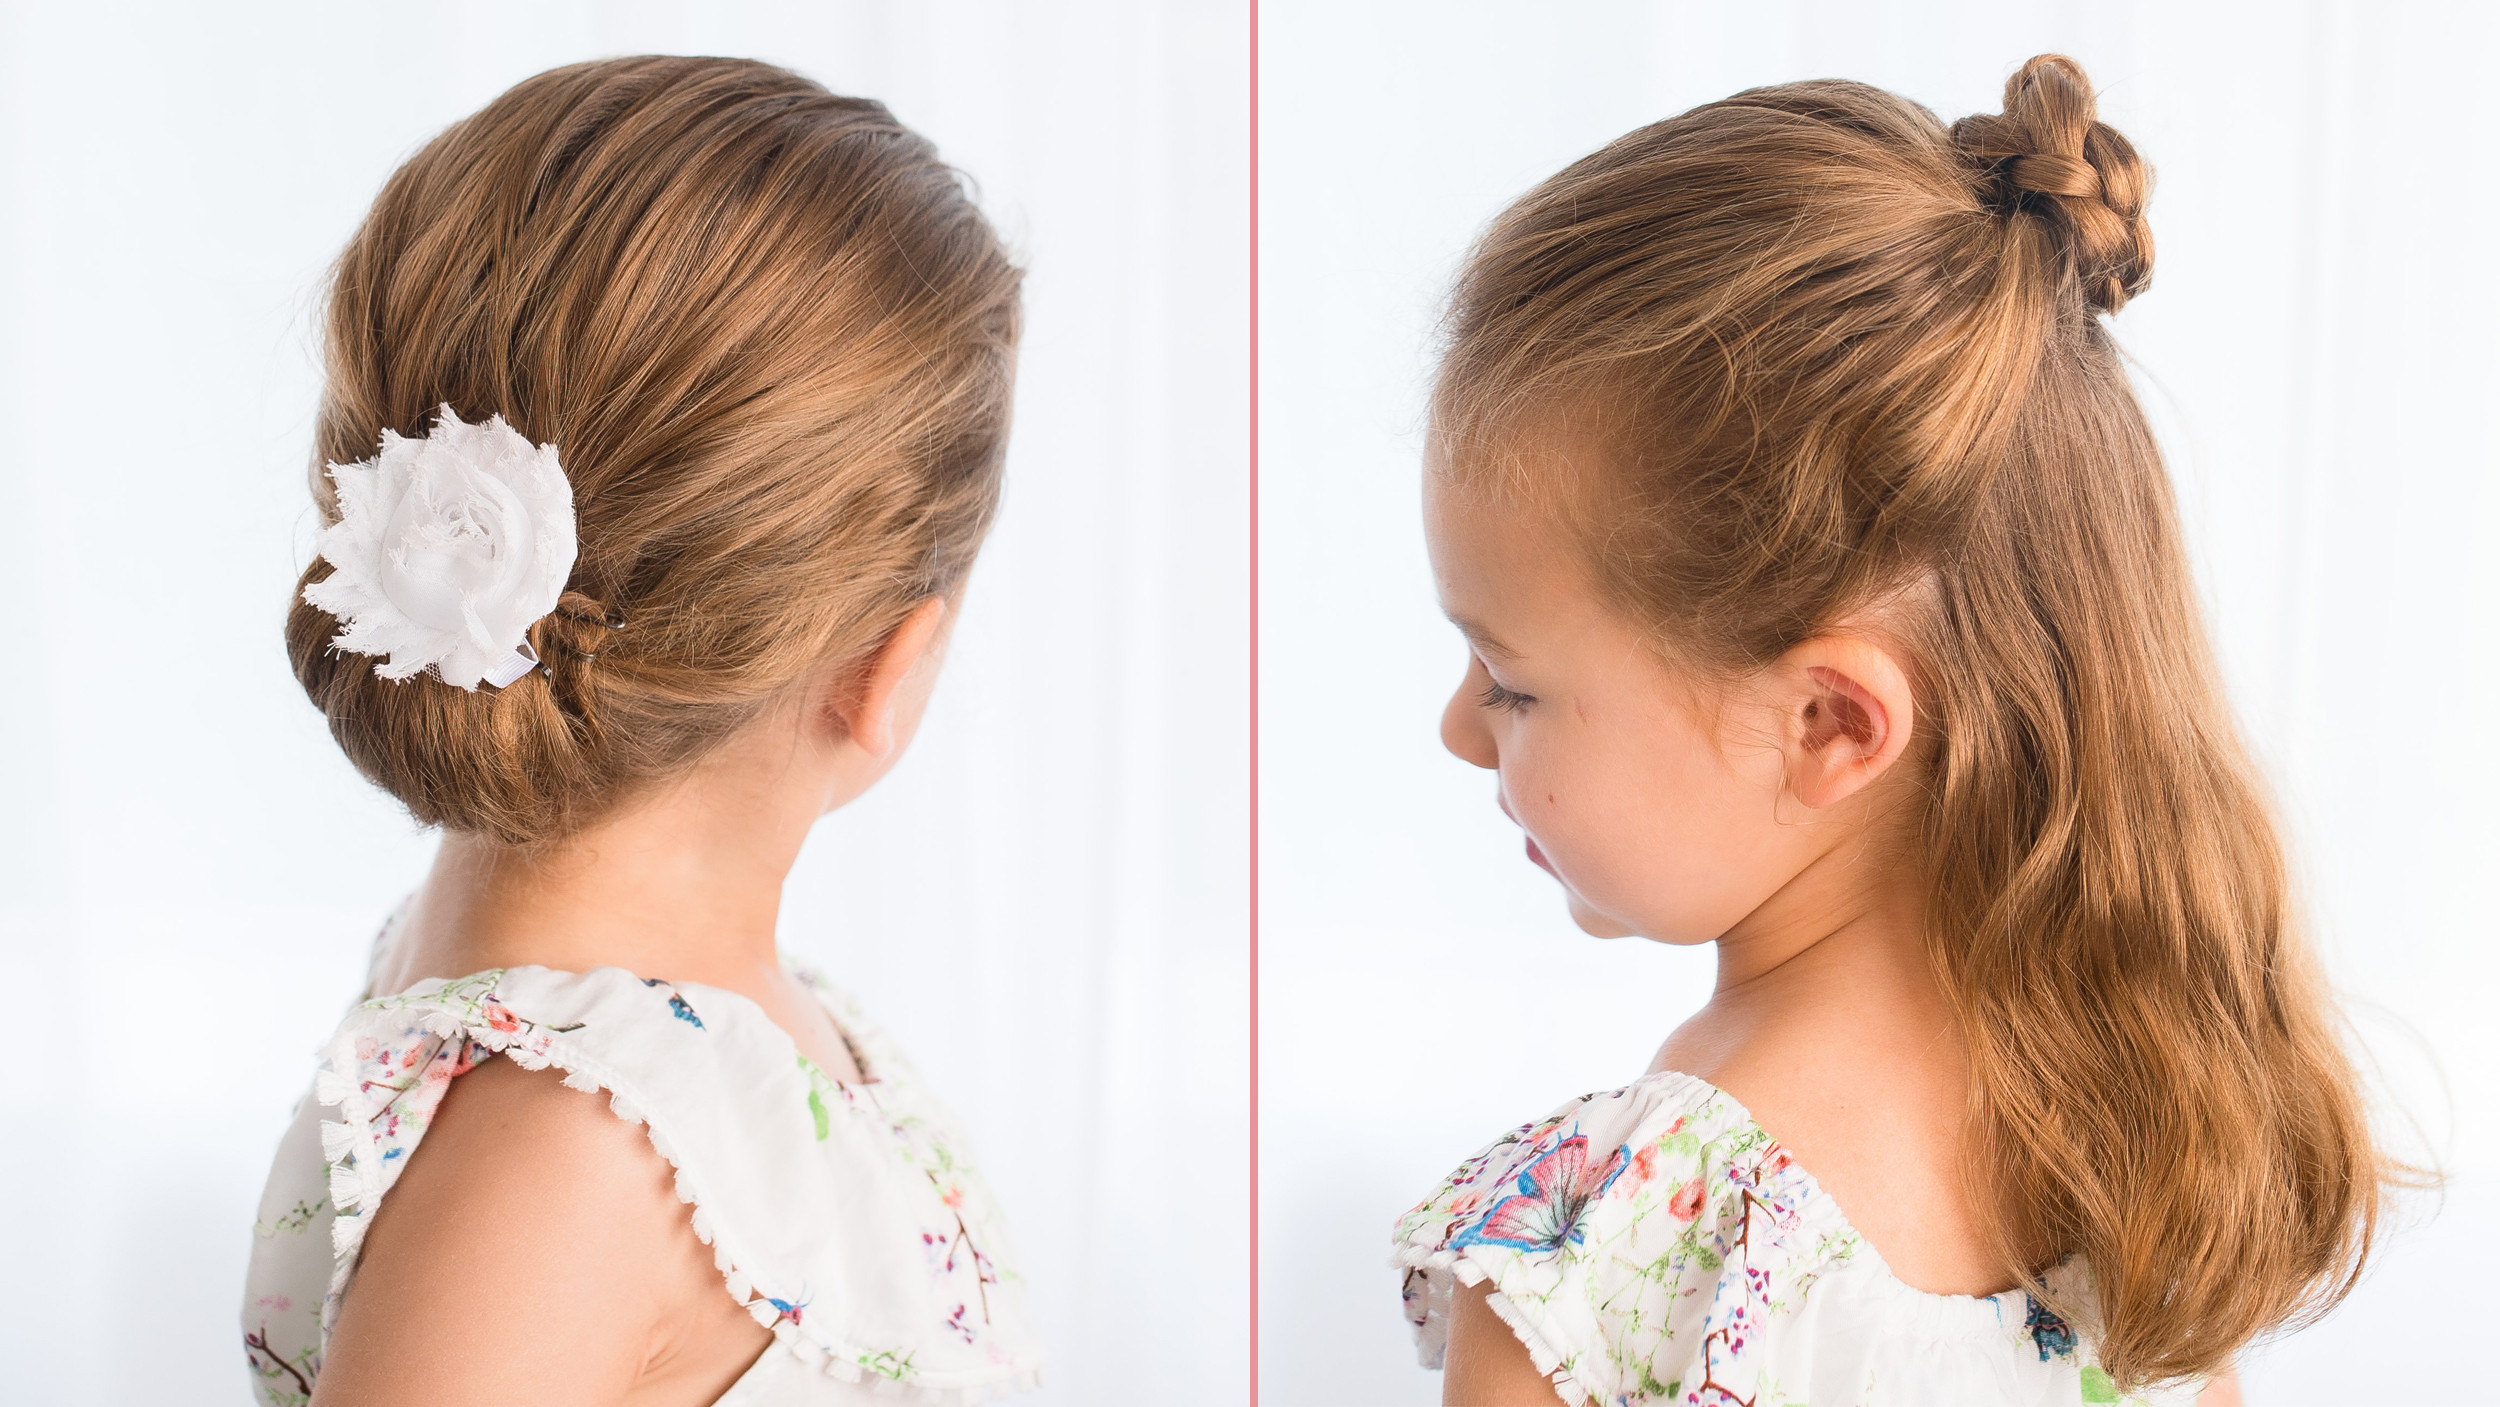 Cute Easy Hairstyles For Little Girls
 Easy hairstyles for girls that you can create in minutes